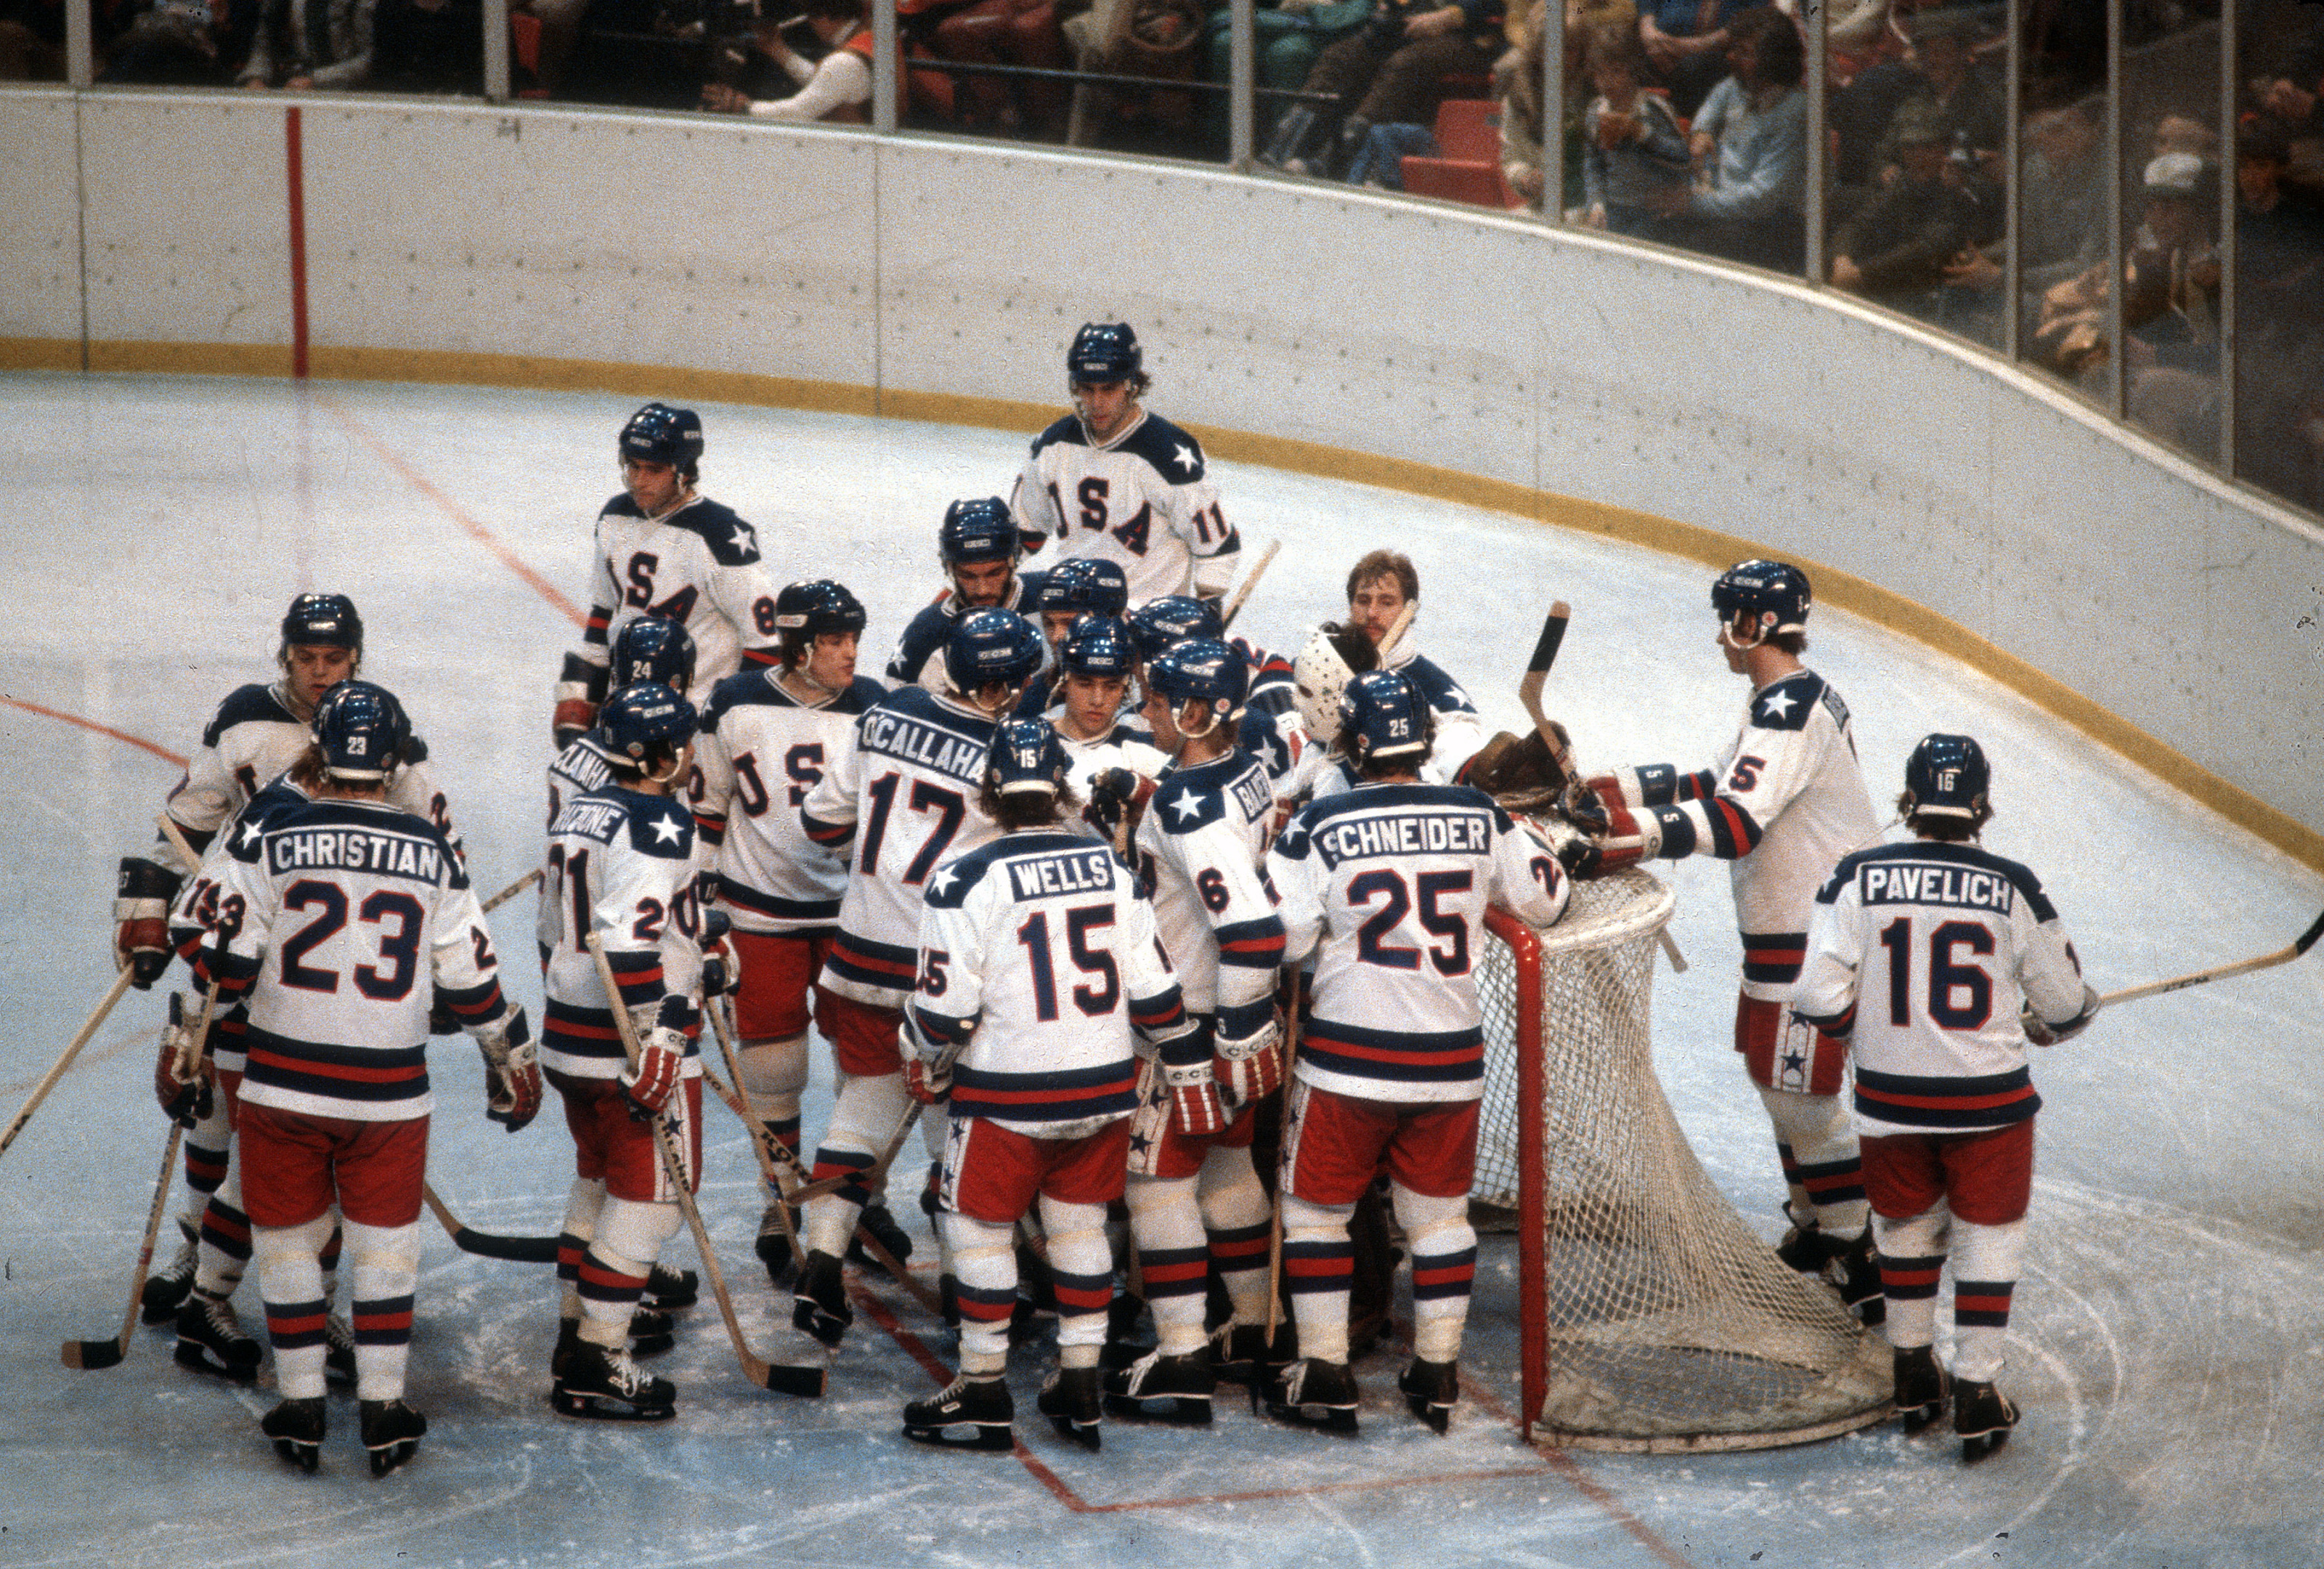 Mark Pavelich, Miracle on Ice 1980 Olympic Hockey Team Member